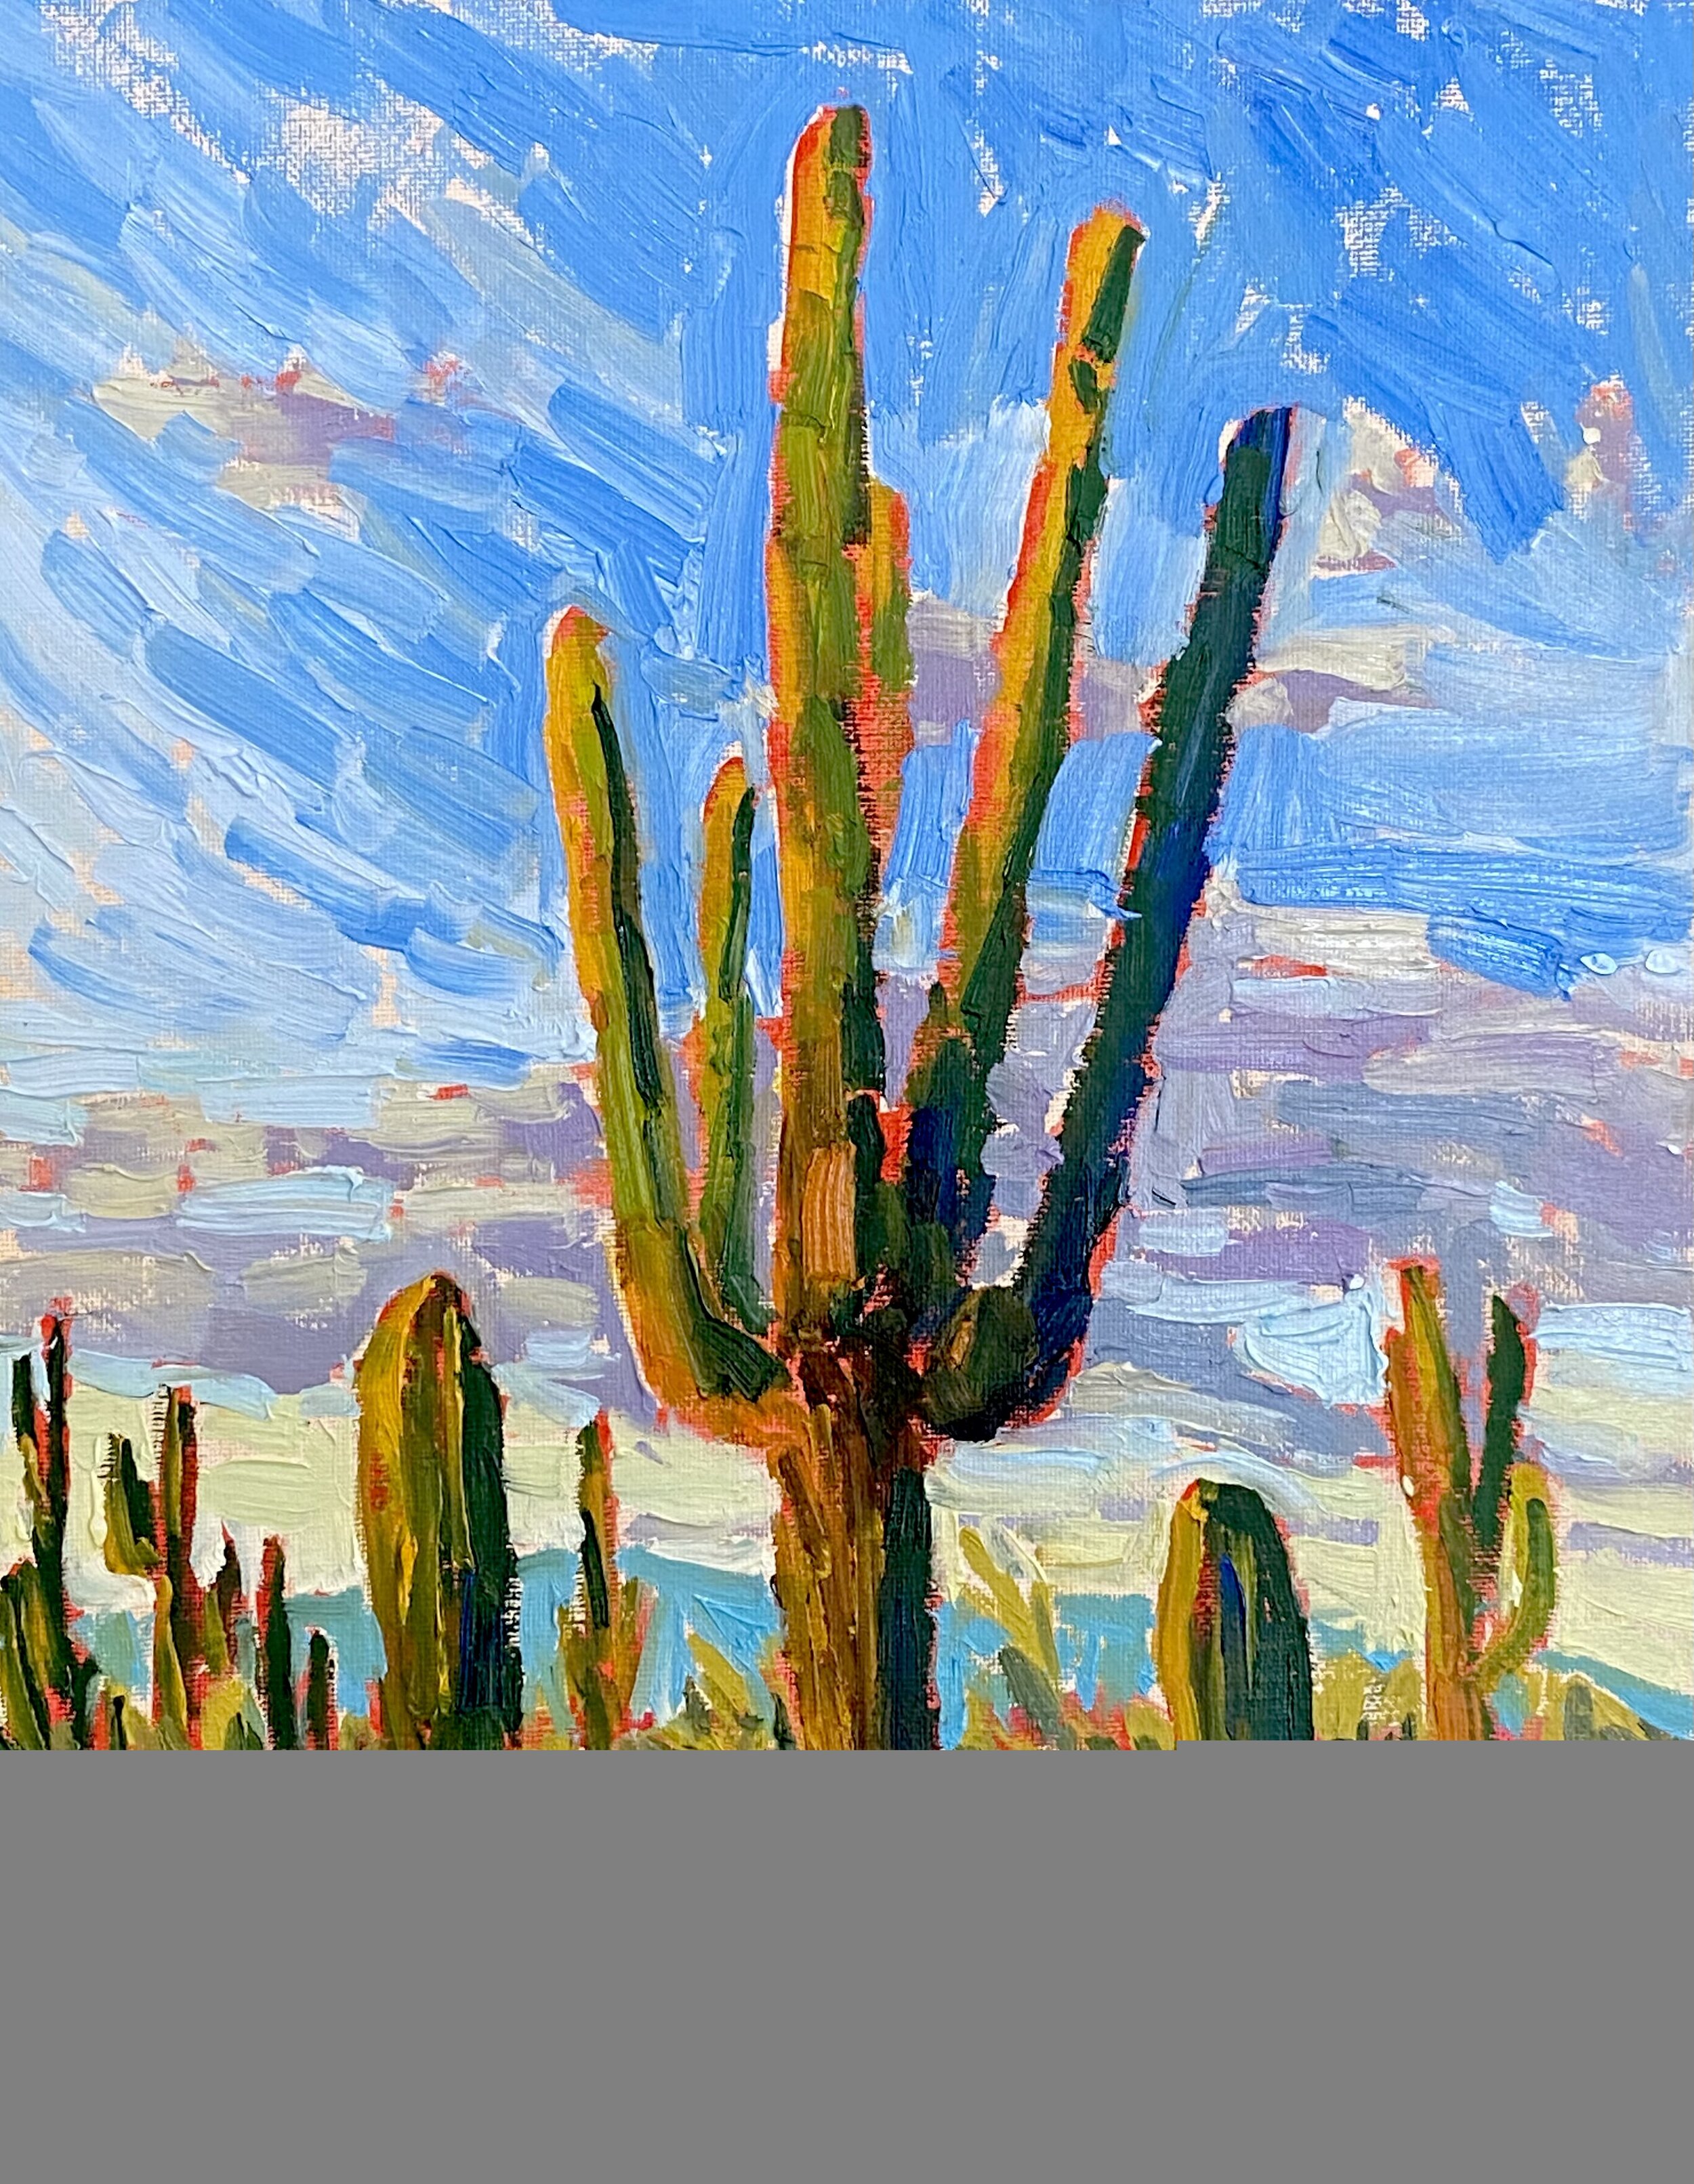 "King of the Saguaros" SOLD